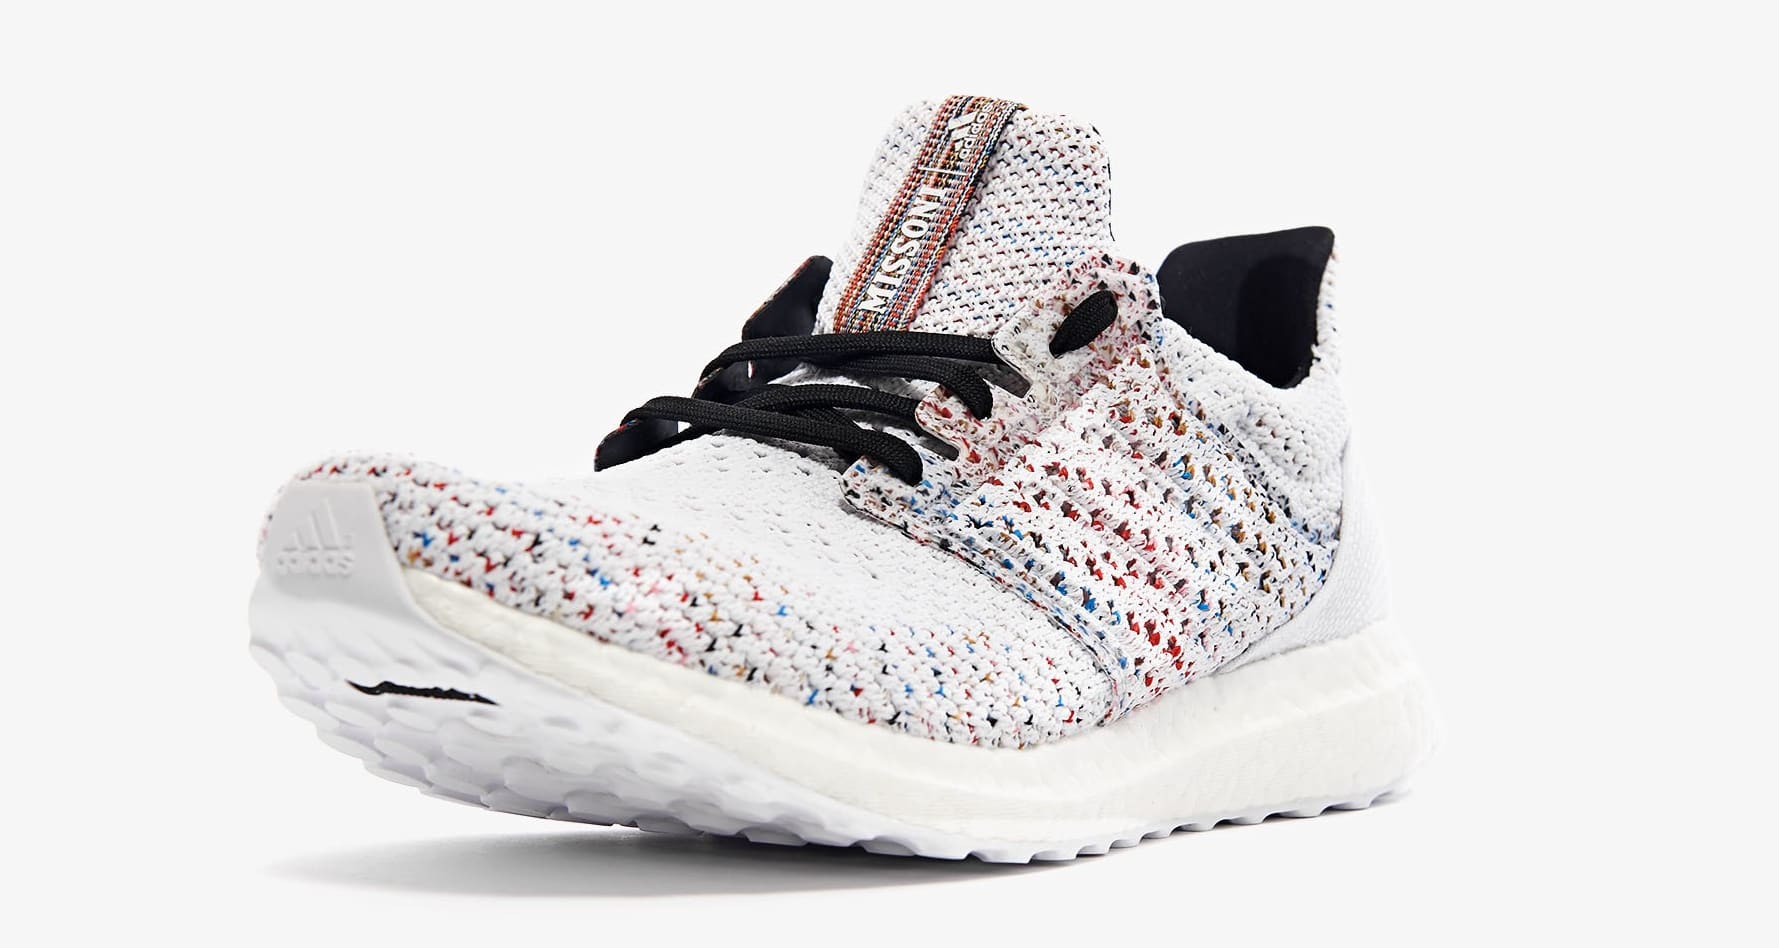 Ultra Boosts Climas Feature Missoni Knit | Complex